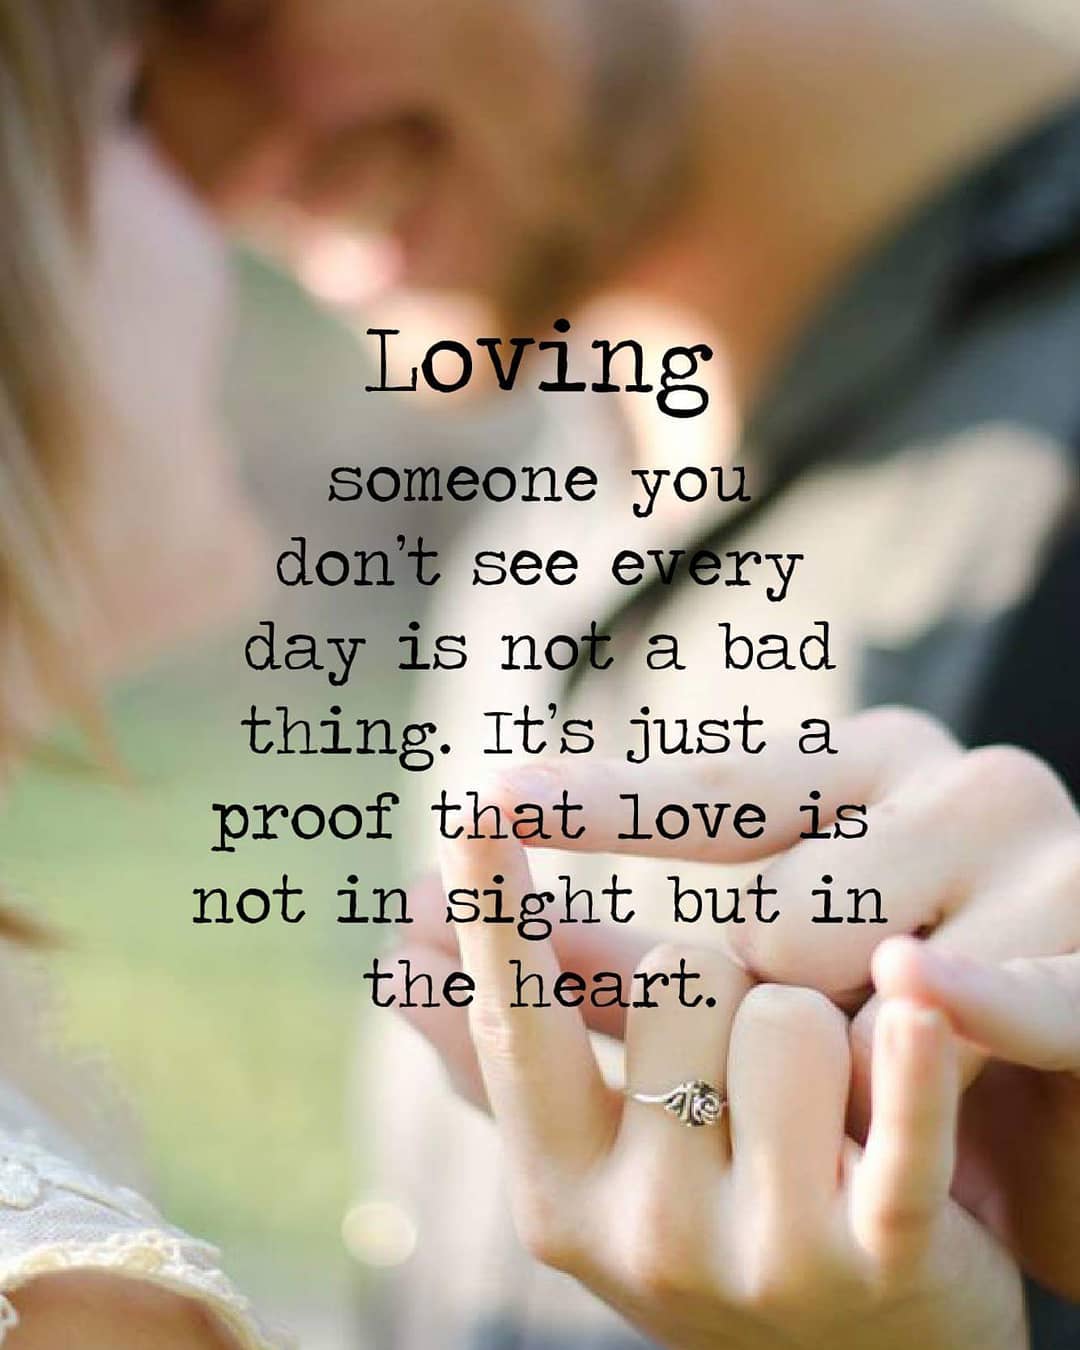  Top 10 Love Quotes  Images Download Free Quotes  love  